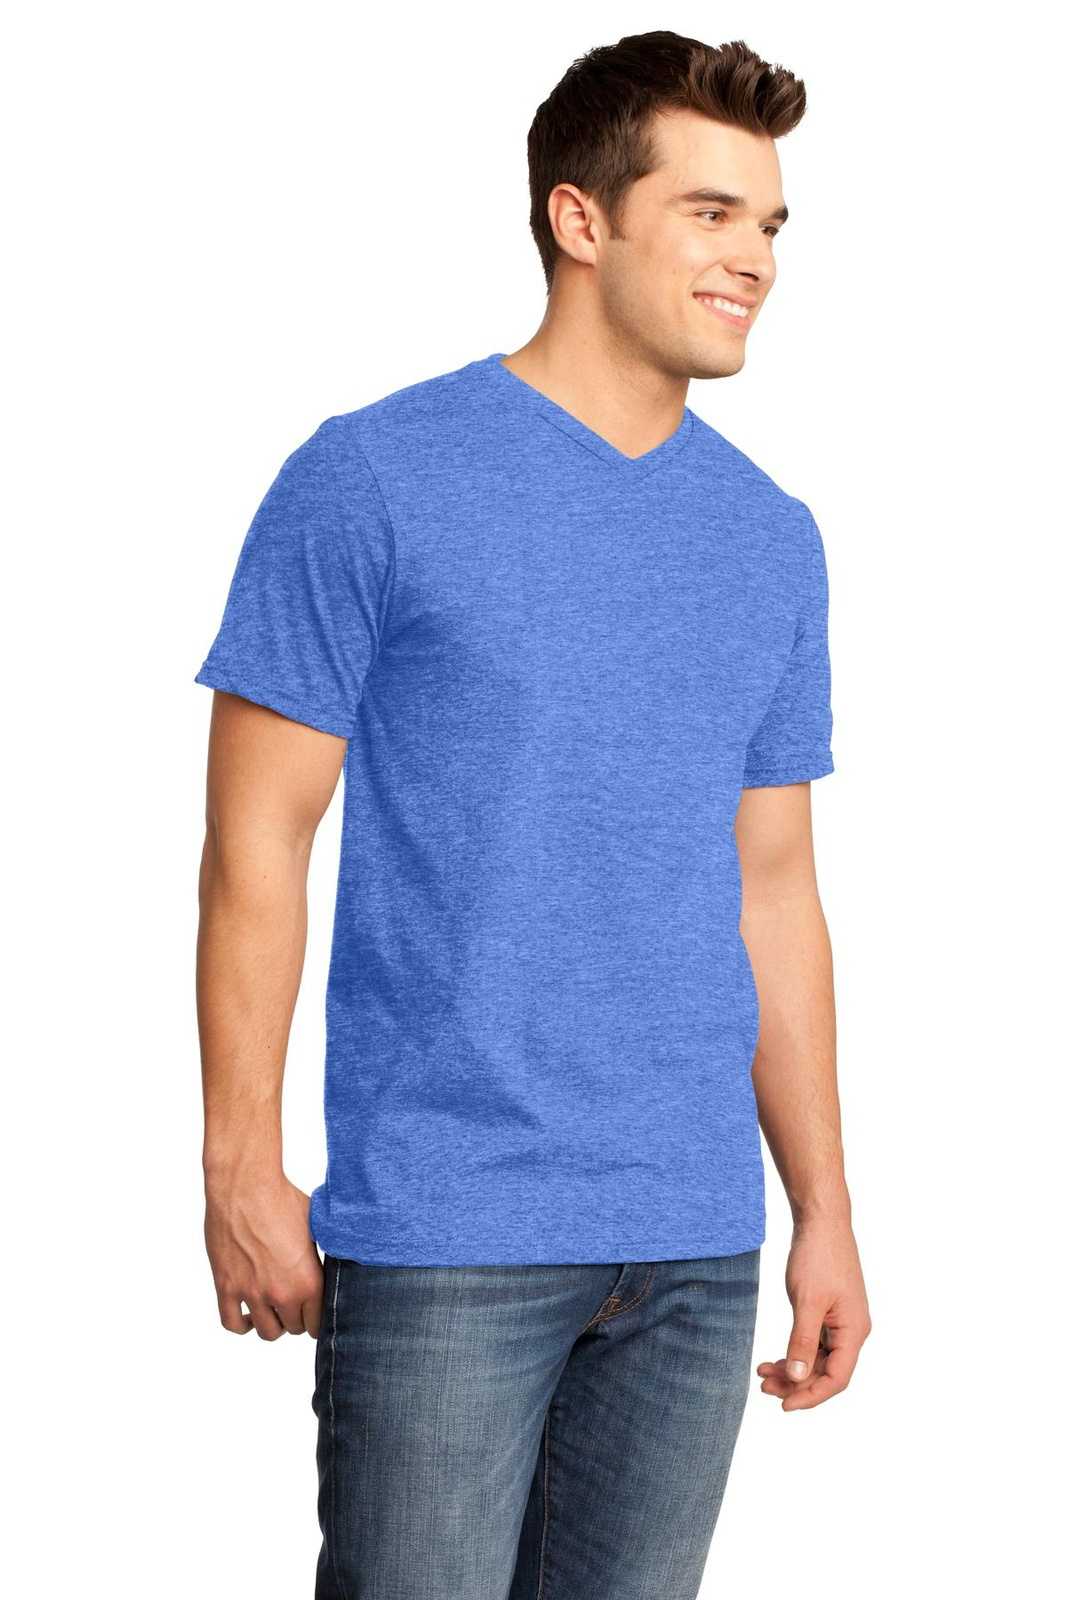 District DT6500 Very Important Tee V-Neck - Heathered Royal - HIT a Double - 4